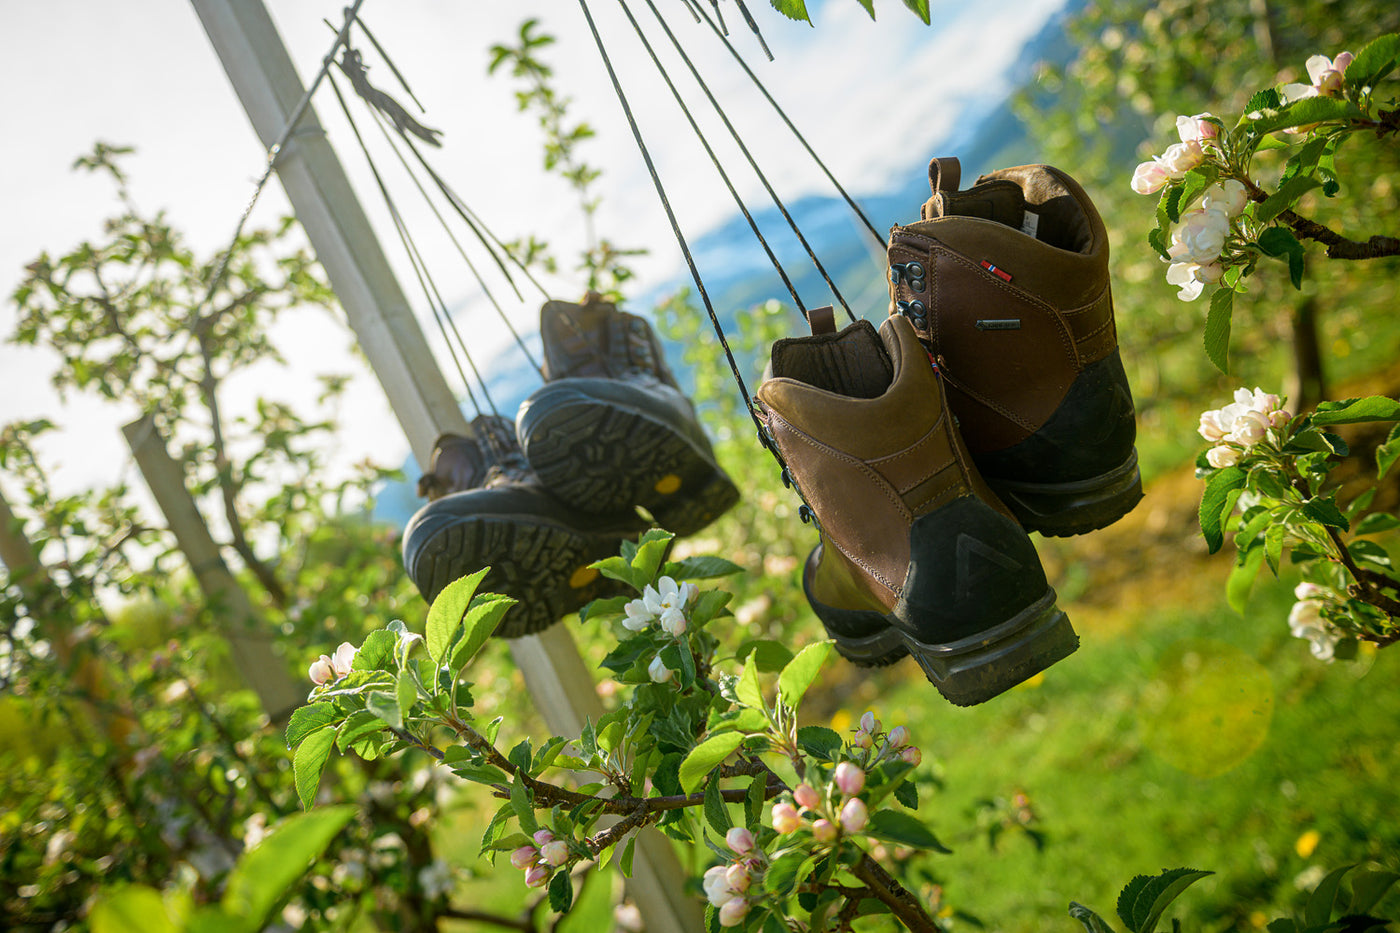 Alfa shoes hanging out in nature